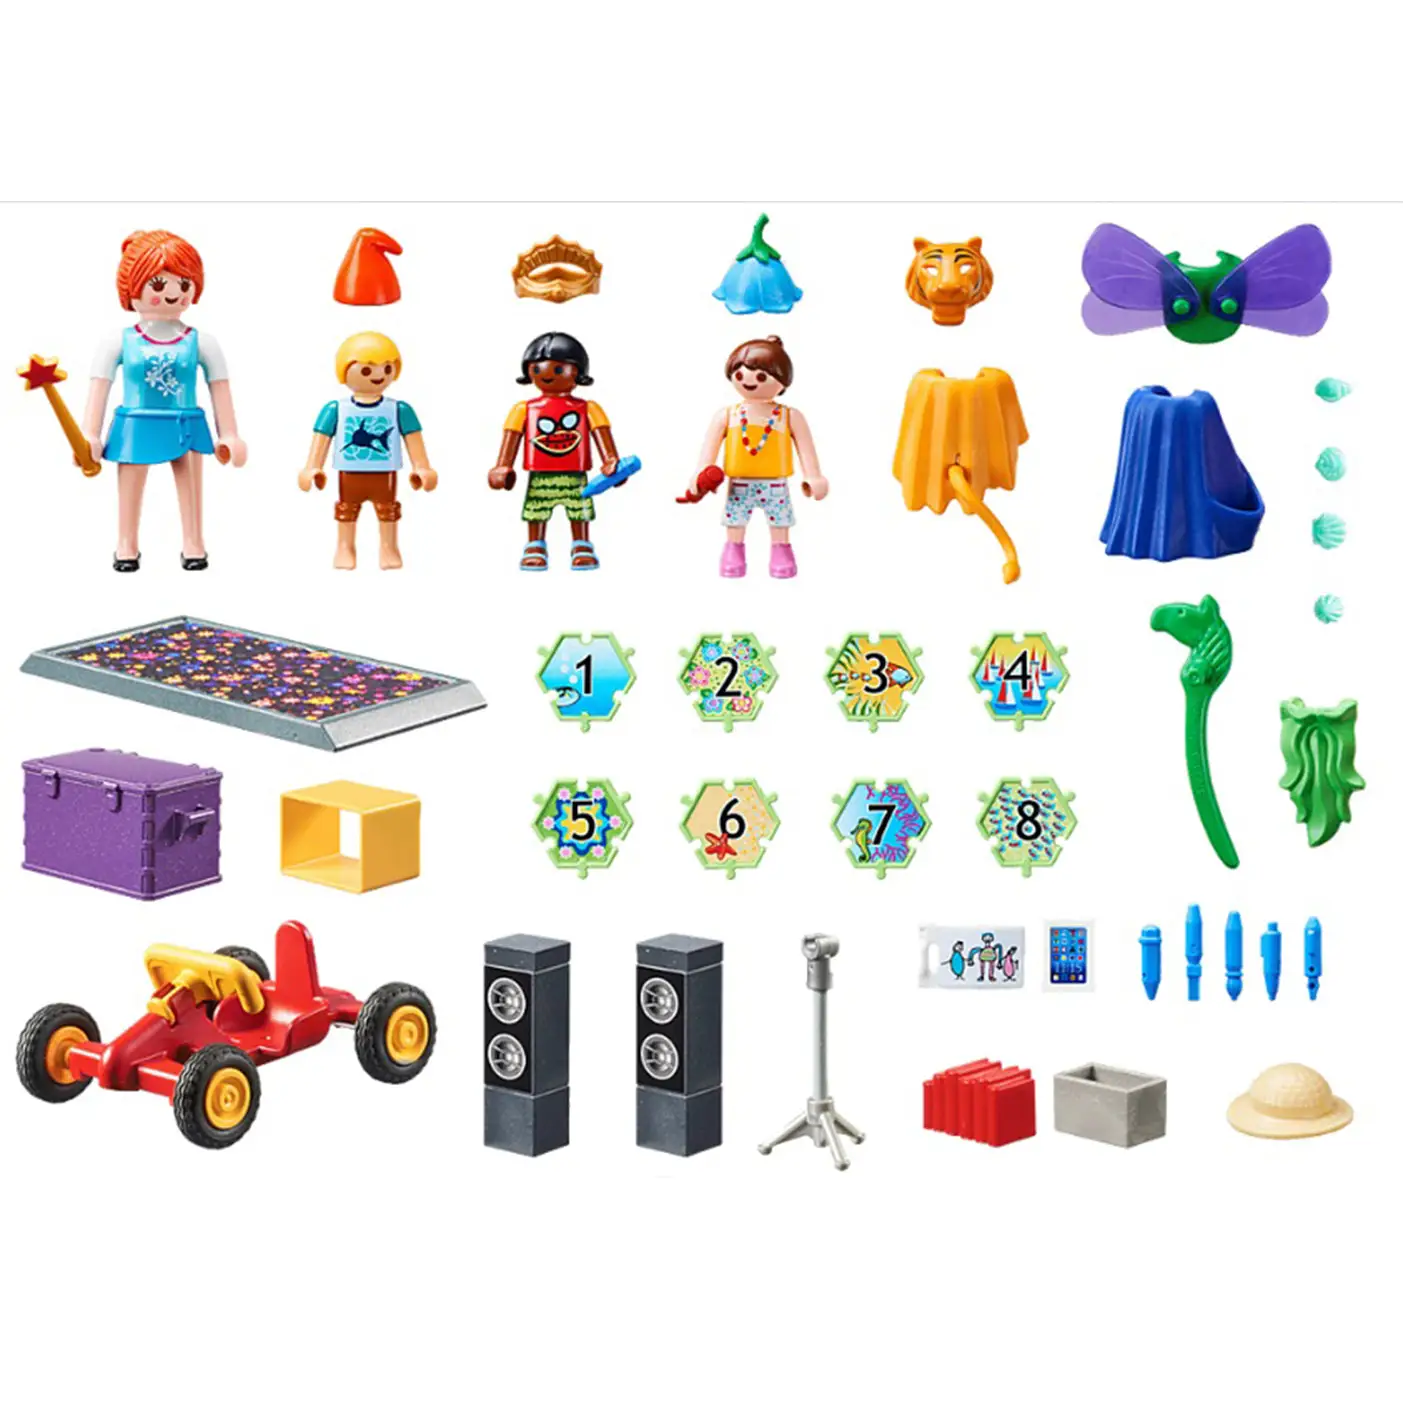 Playmobil Family Fun - Kids Club 70440 (for kids 4 years old and up)